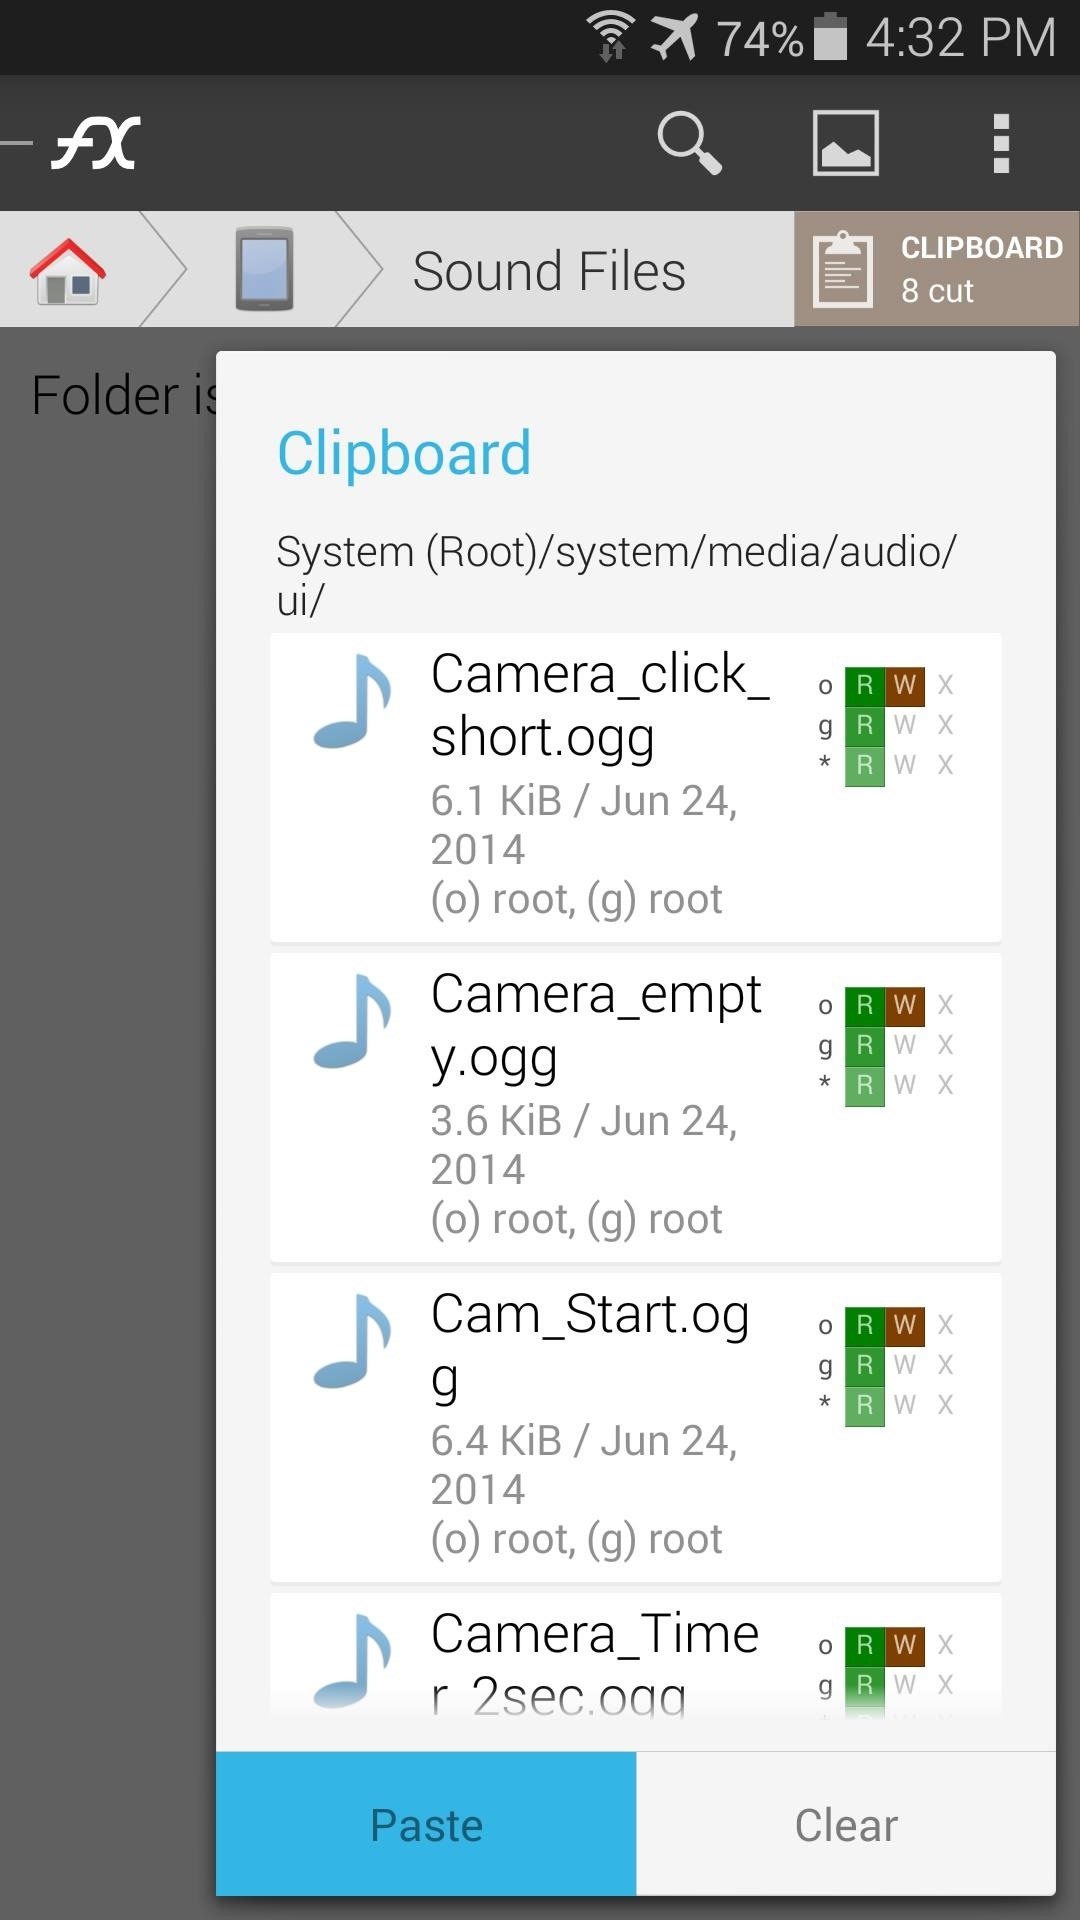 How to Get Rid of Annoying Startup, Camera, & Low Battery Sounds on Your Samsung Galaxy S5